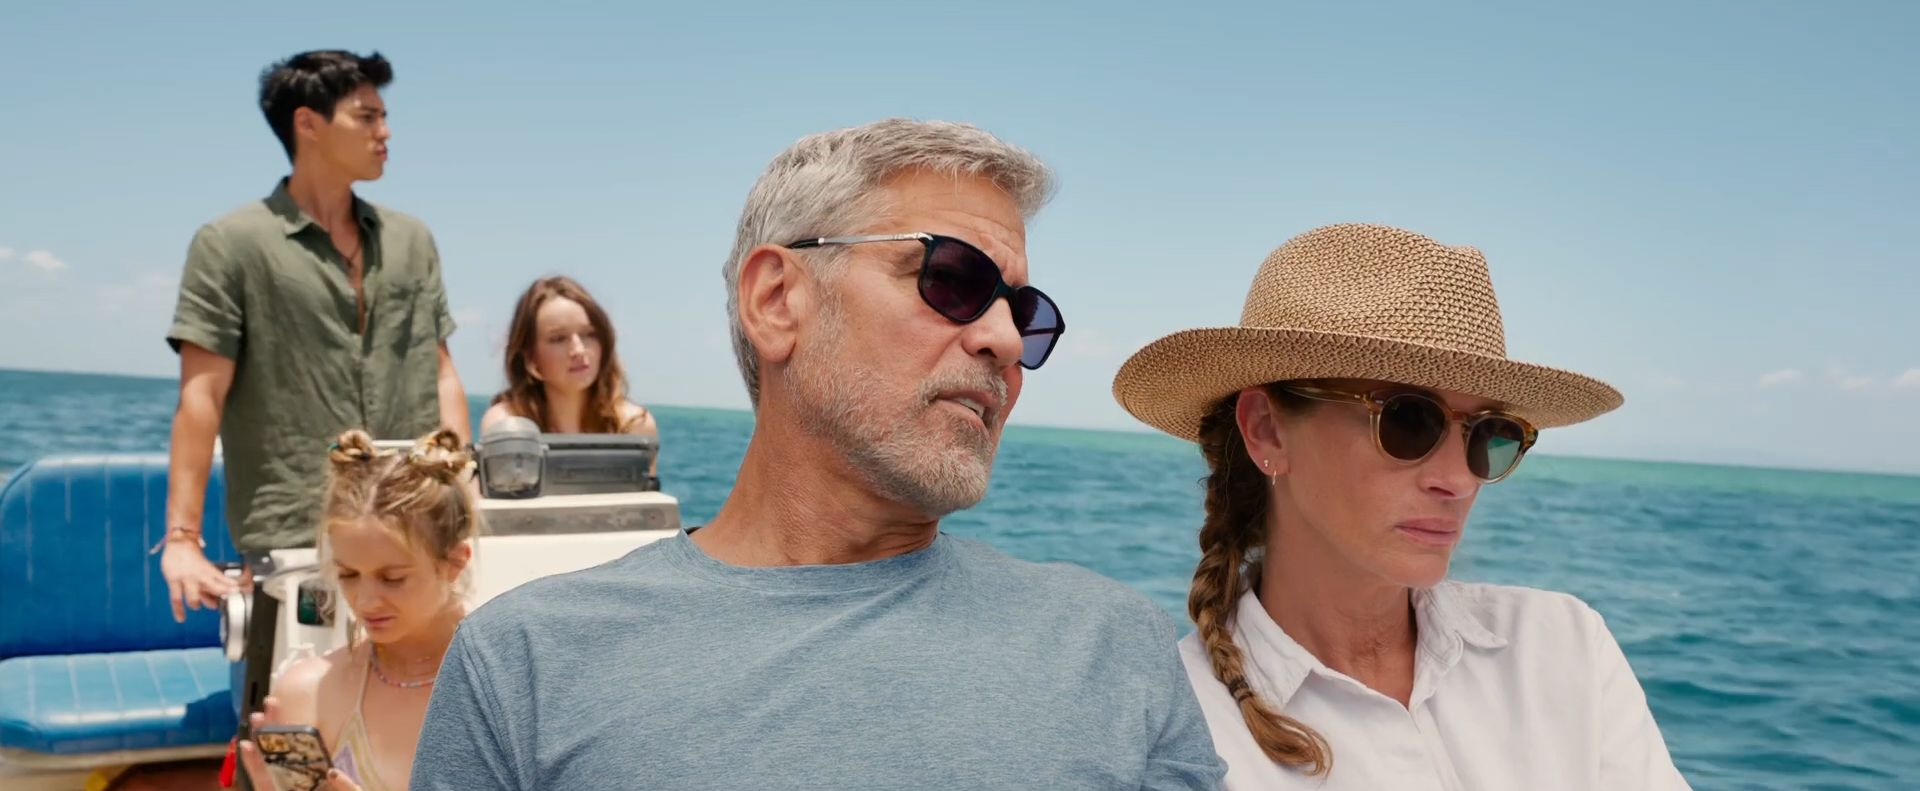 George Clooney was in the company of his family while filming this movie.  (Universal Pictures)